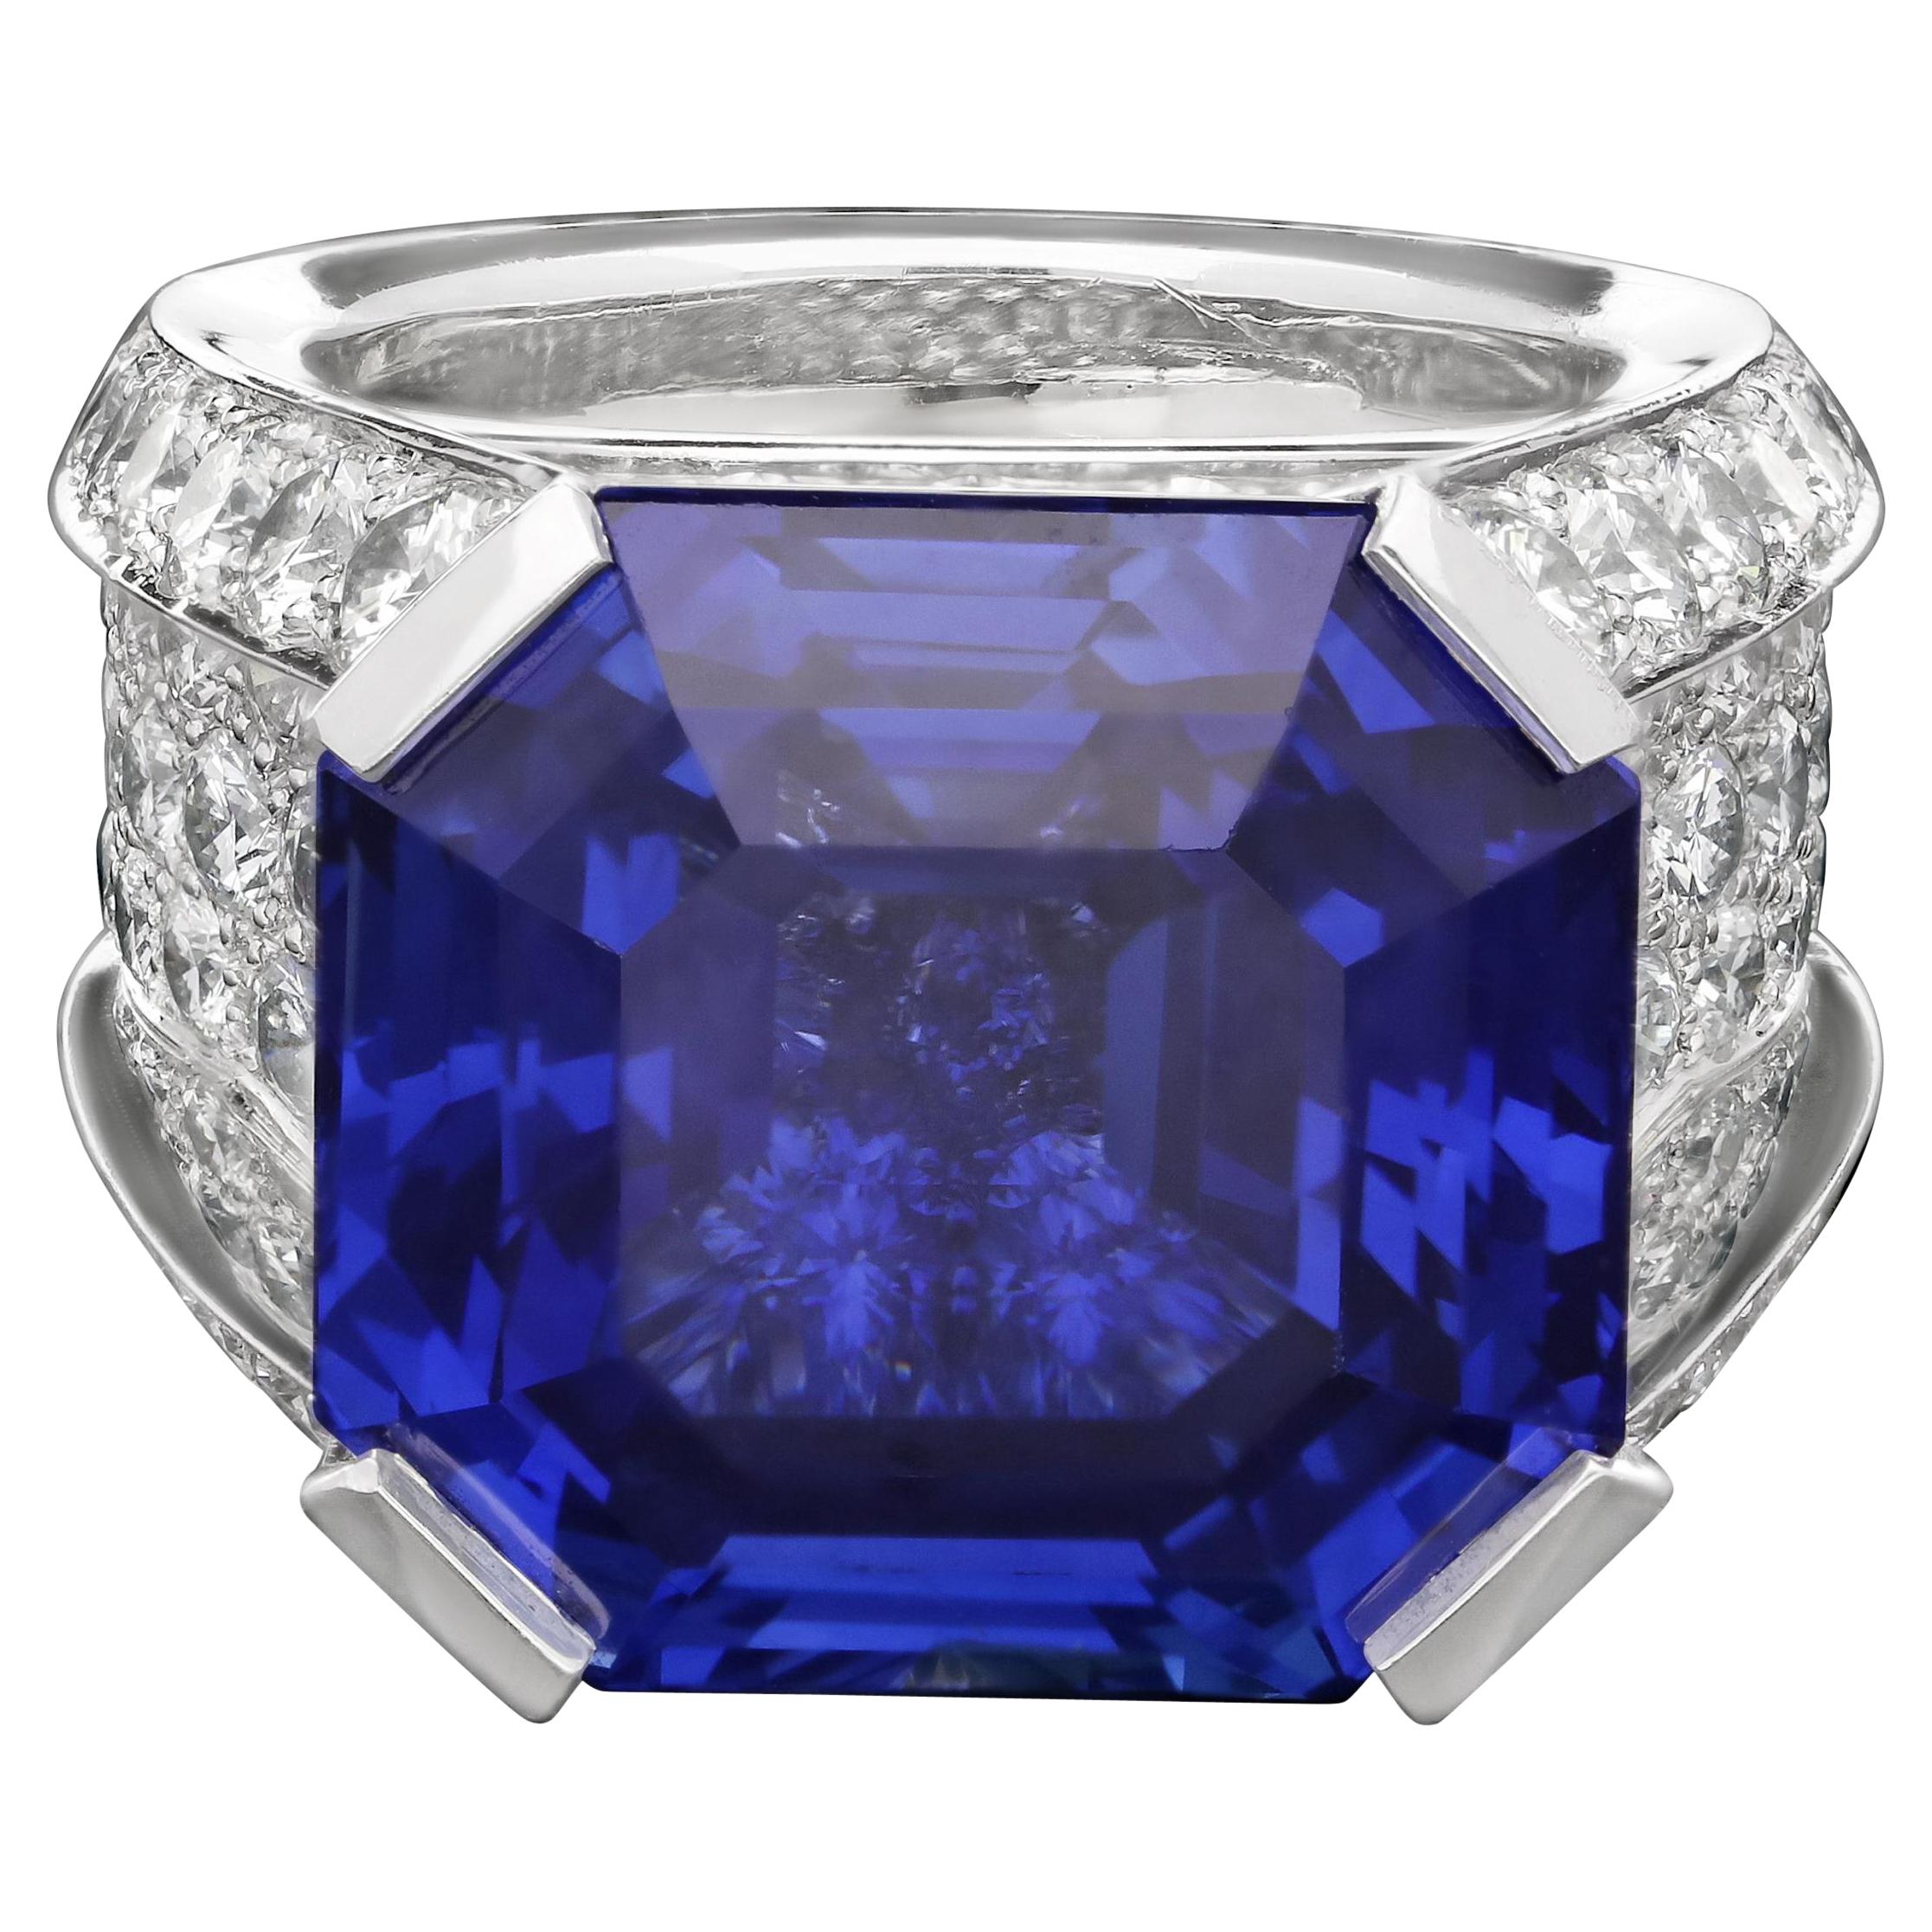 Cartier Magnificent 27carat Sapphire and Diamond Ring